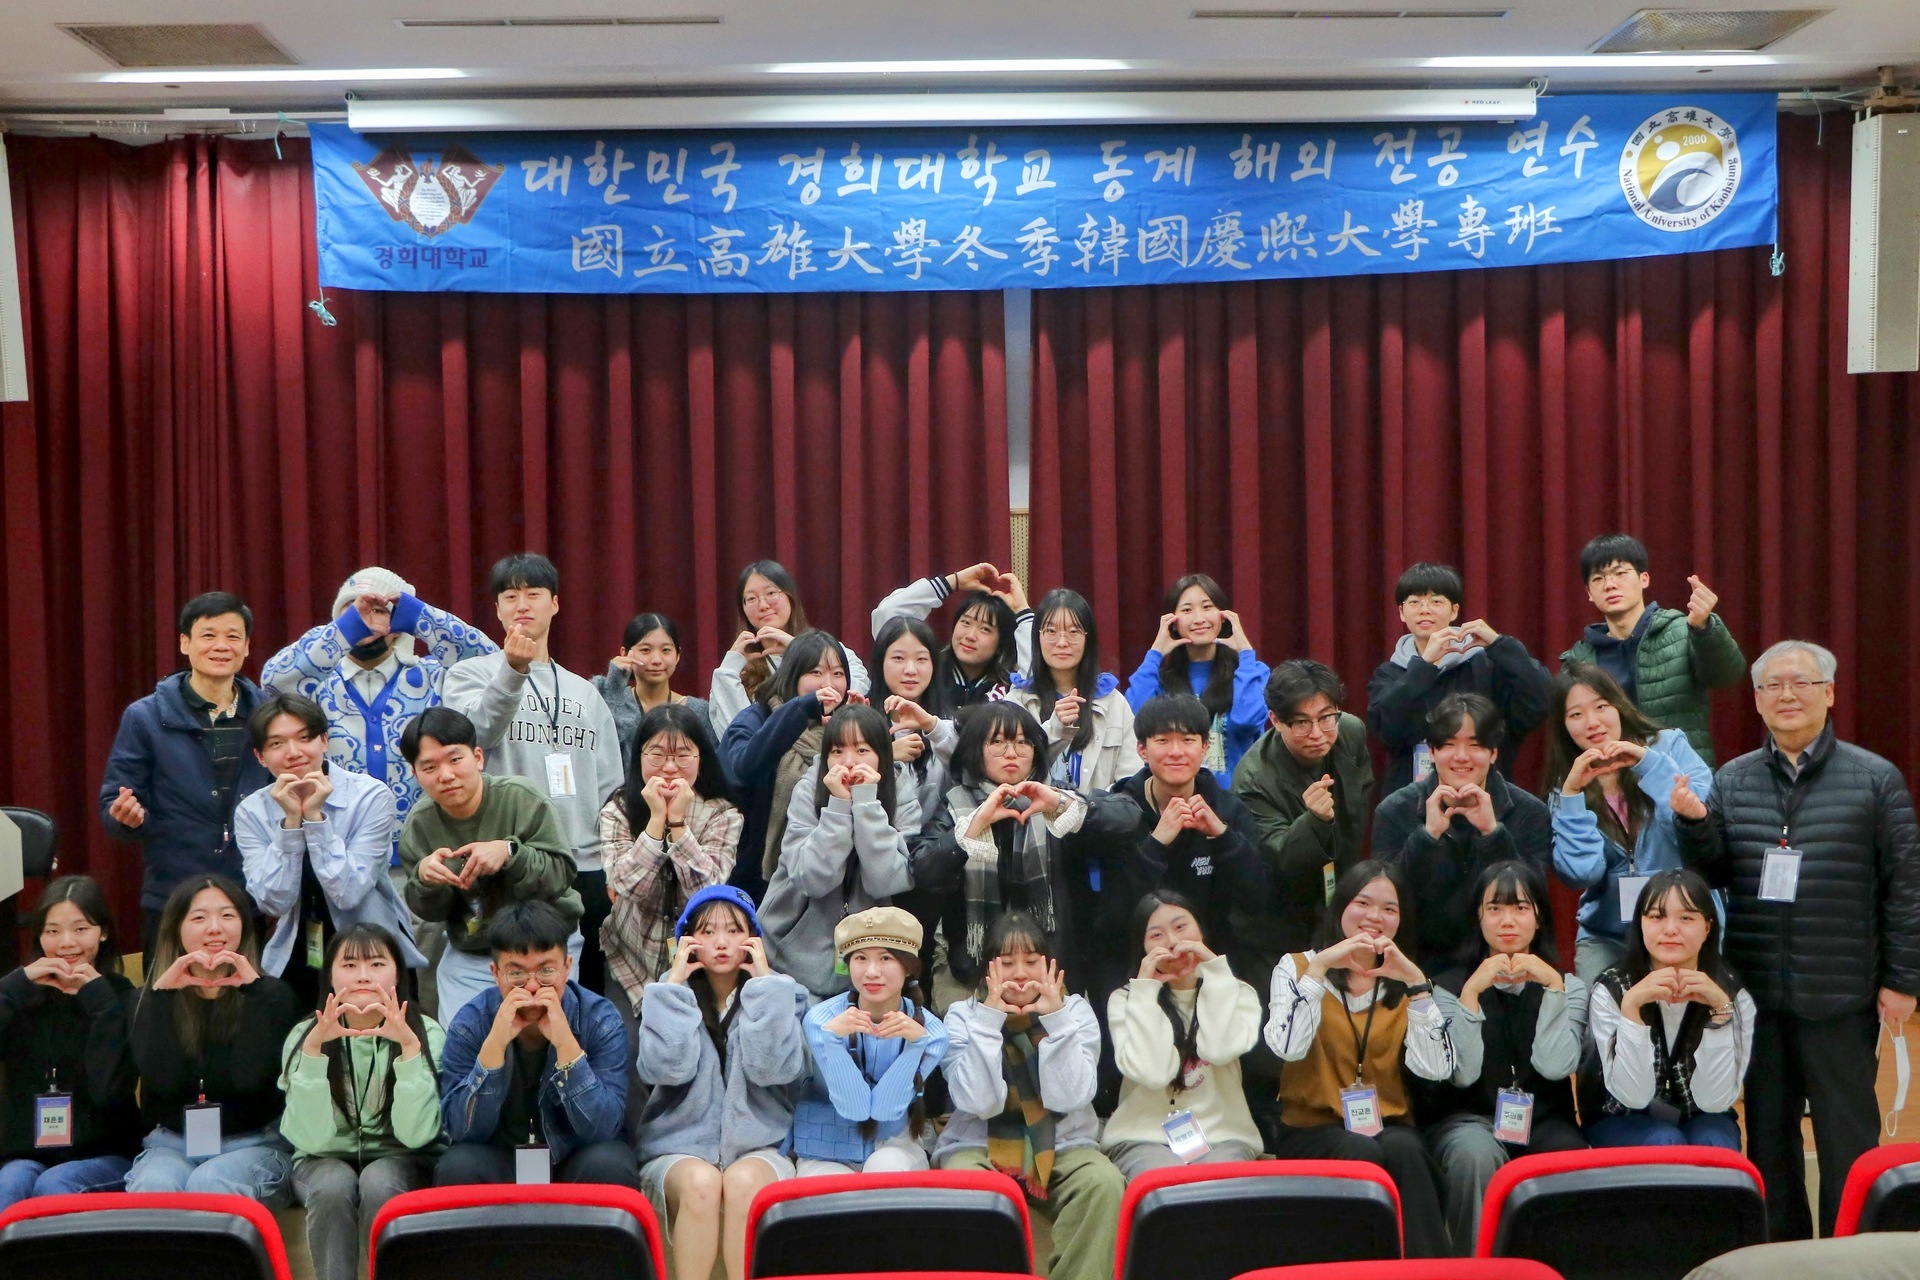 Department of East Asian Languages and Literature organized a cultural study program for students and faculty from Kyung Hee University. 009